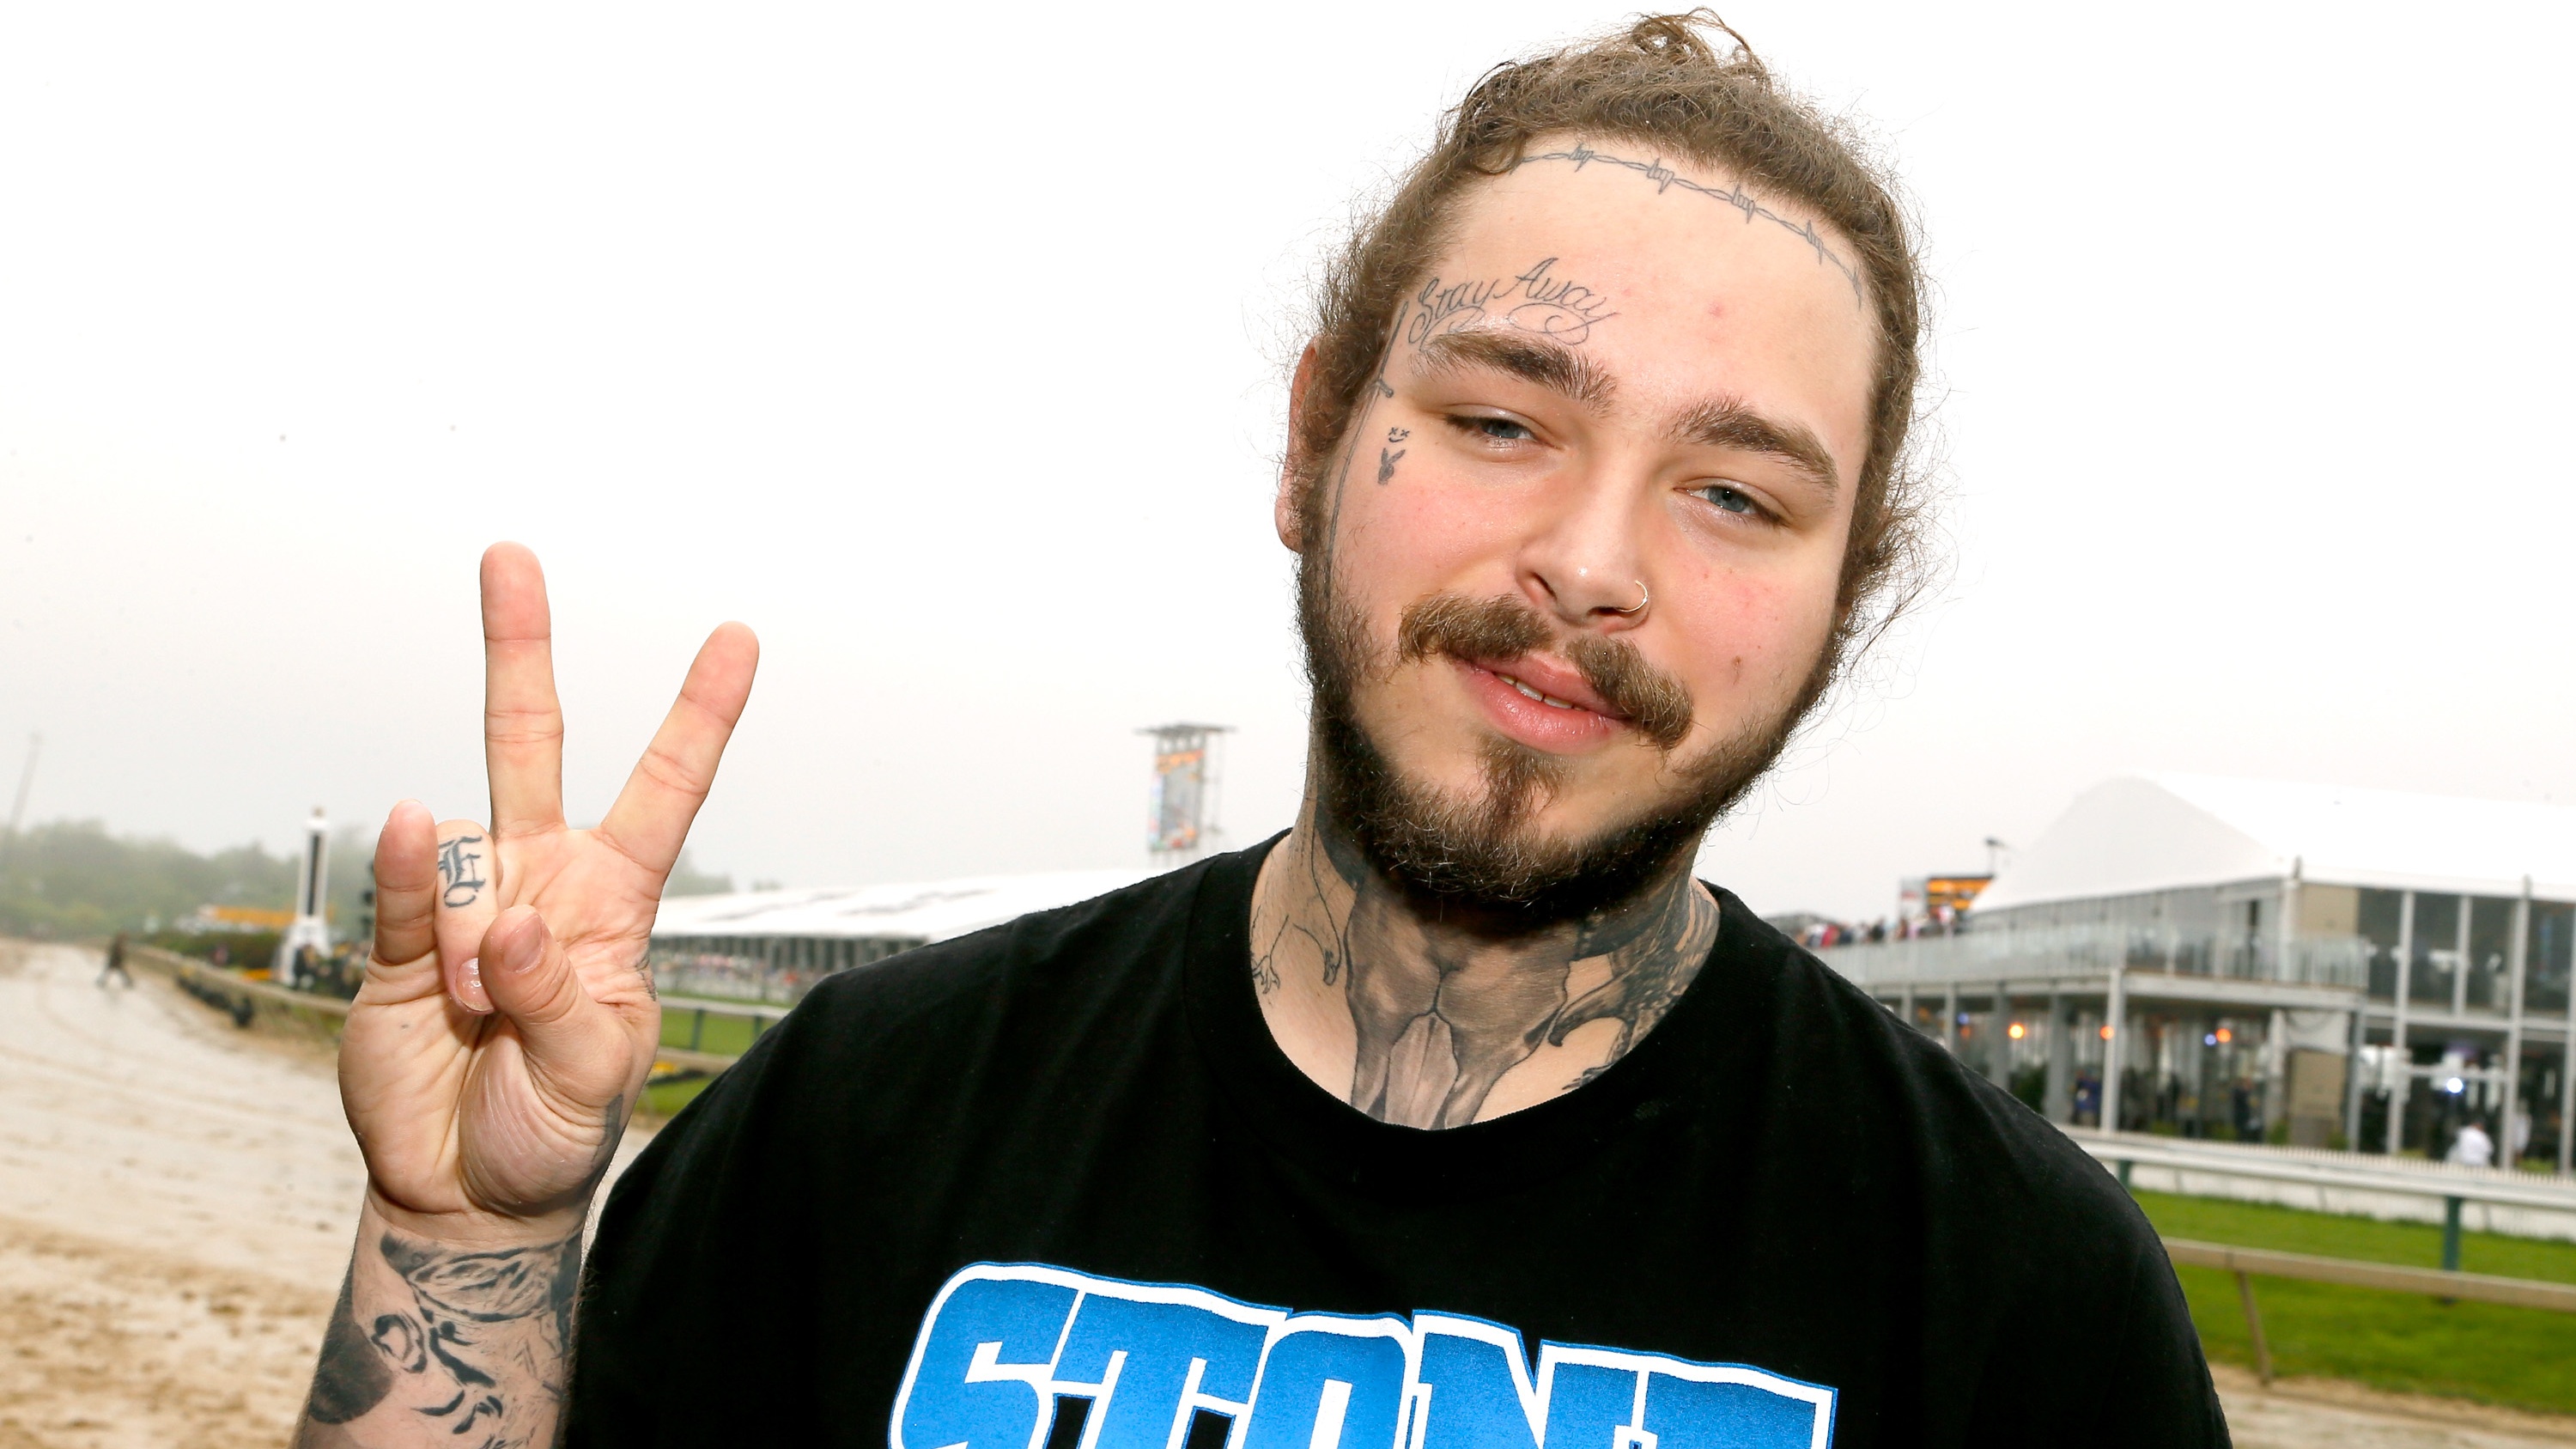  Post Malone succumbs to the lure of power, purchases one-of-a-kind Ring of Sauron Magic: The Gathering card valued at $2 million 